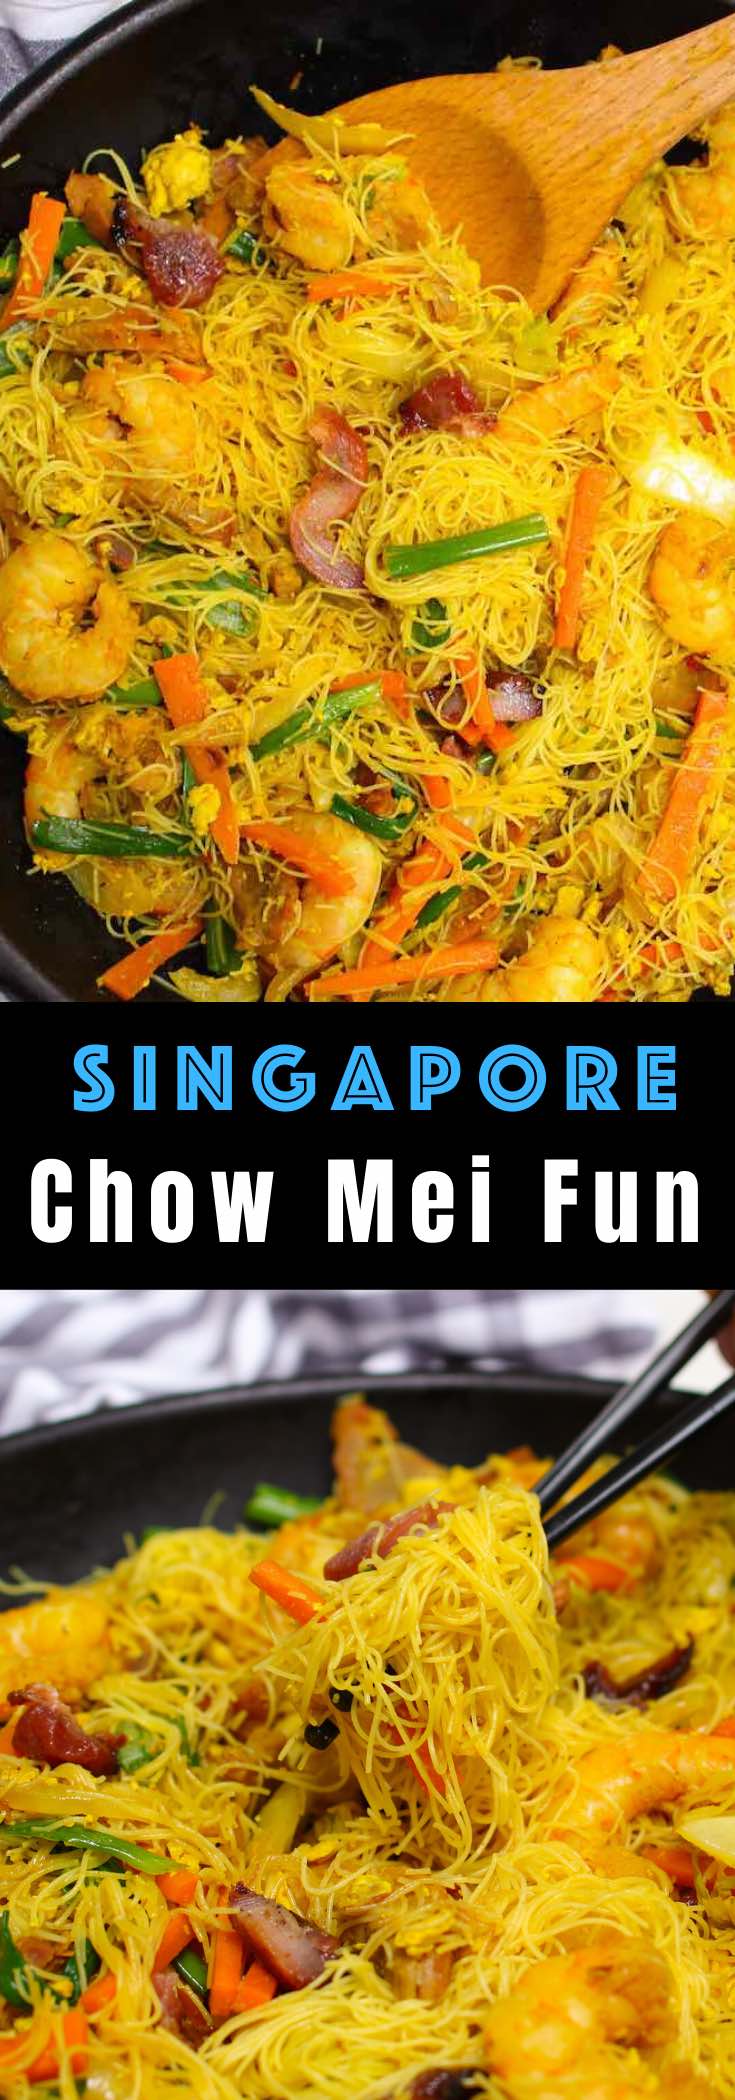 Chow Mei Fun is a classic Cantonese dish made with thin rice noodles, vegetables and pork or shrimp although there are many substitutions possible. It's pure comfort food that's ready in just 20 minutes! #chowmeifun @singaporenoodles